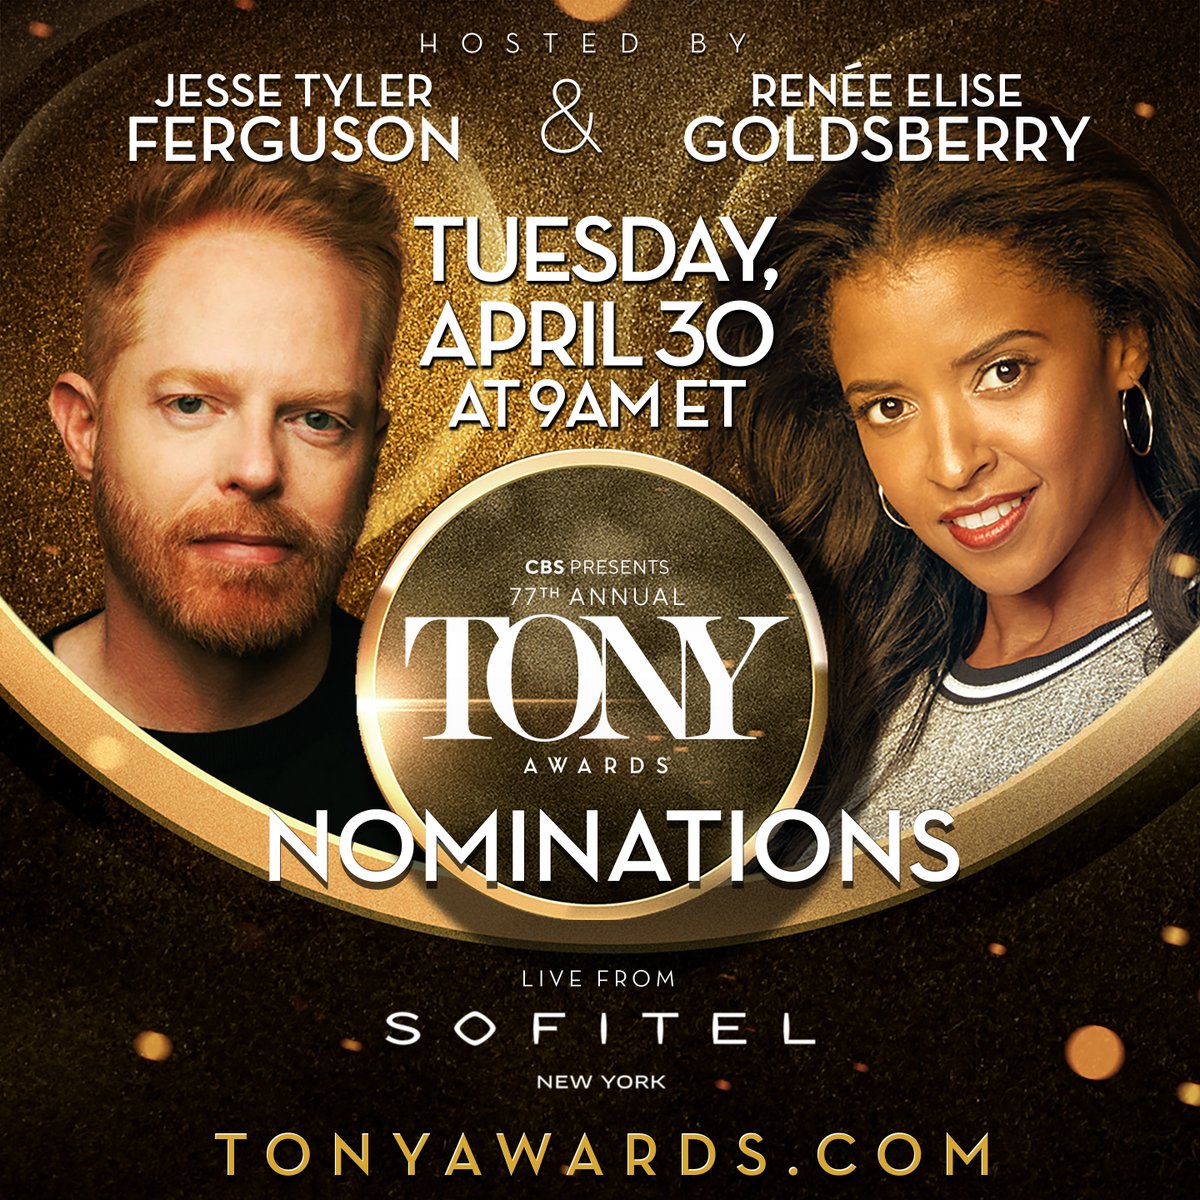 It's almost time to celebrate the best of #Broadway! @ReneeGoldsberry and @jessetyler are set to reveal the 77th Annual #TonyAwards nominations at @SofitelNYC. Tune in on Tuesday, April 30th to see them live on @CBS at 8:30AM ET and on our official YouTube page at 9:00AM ET.